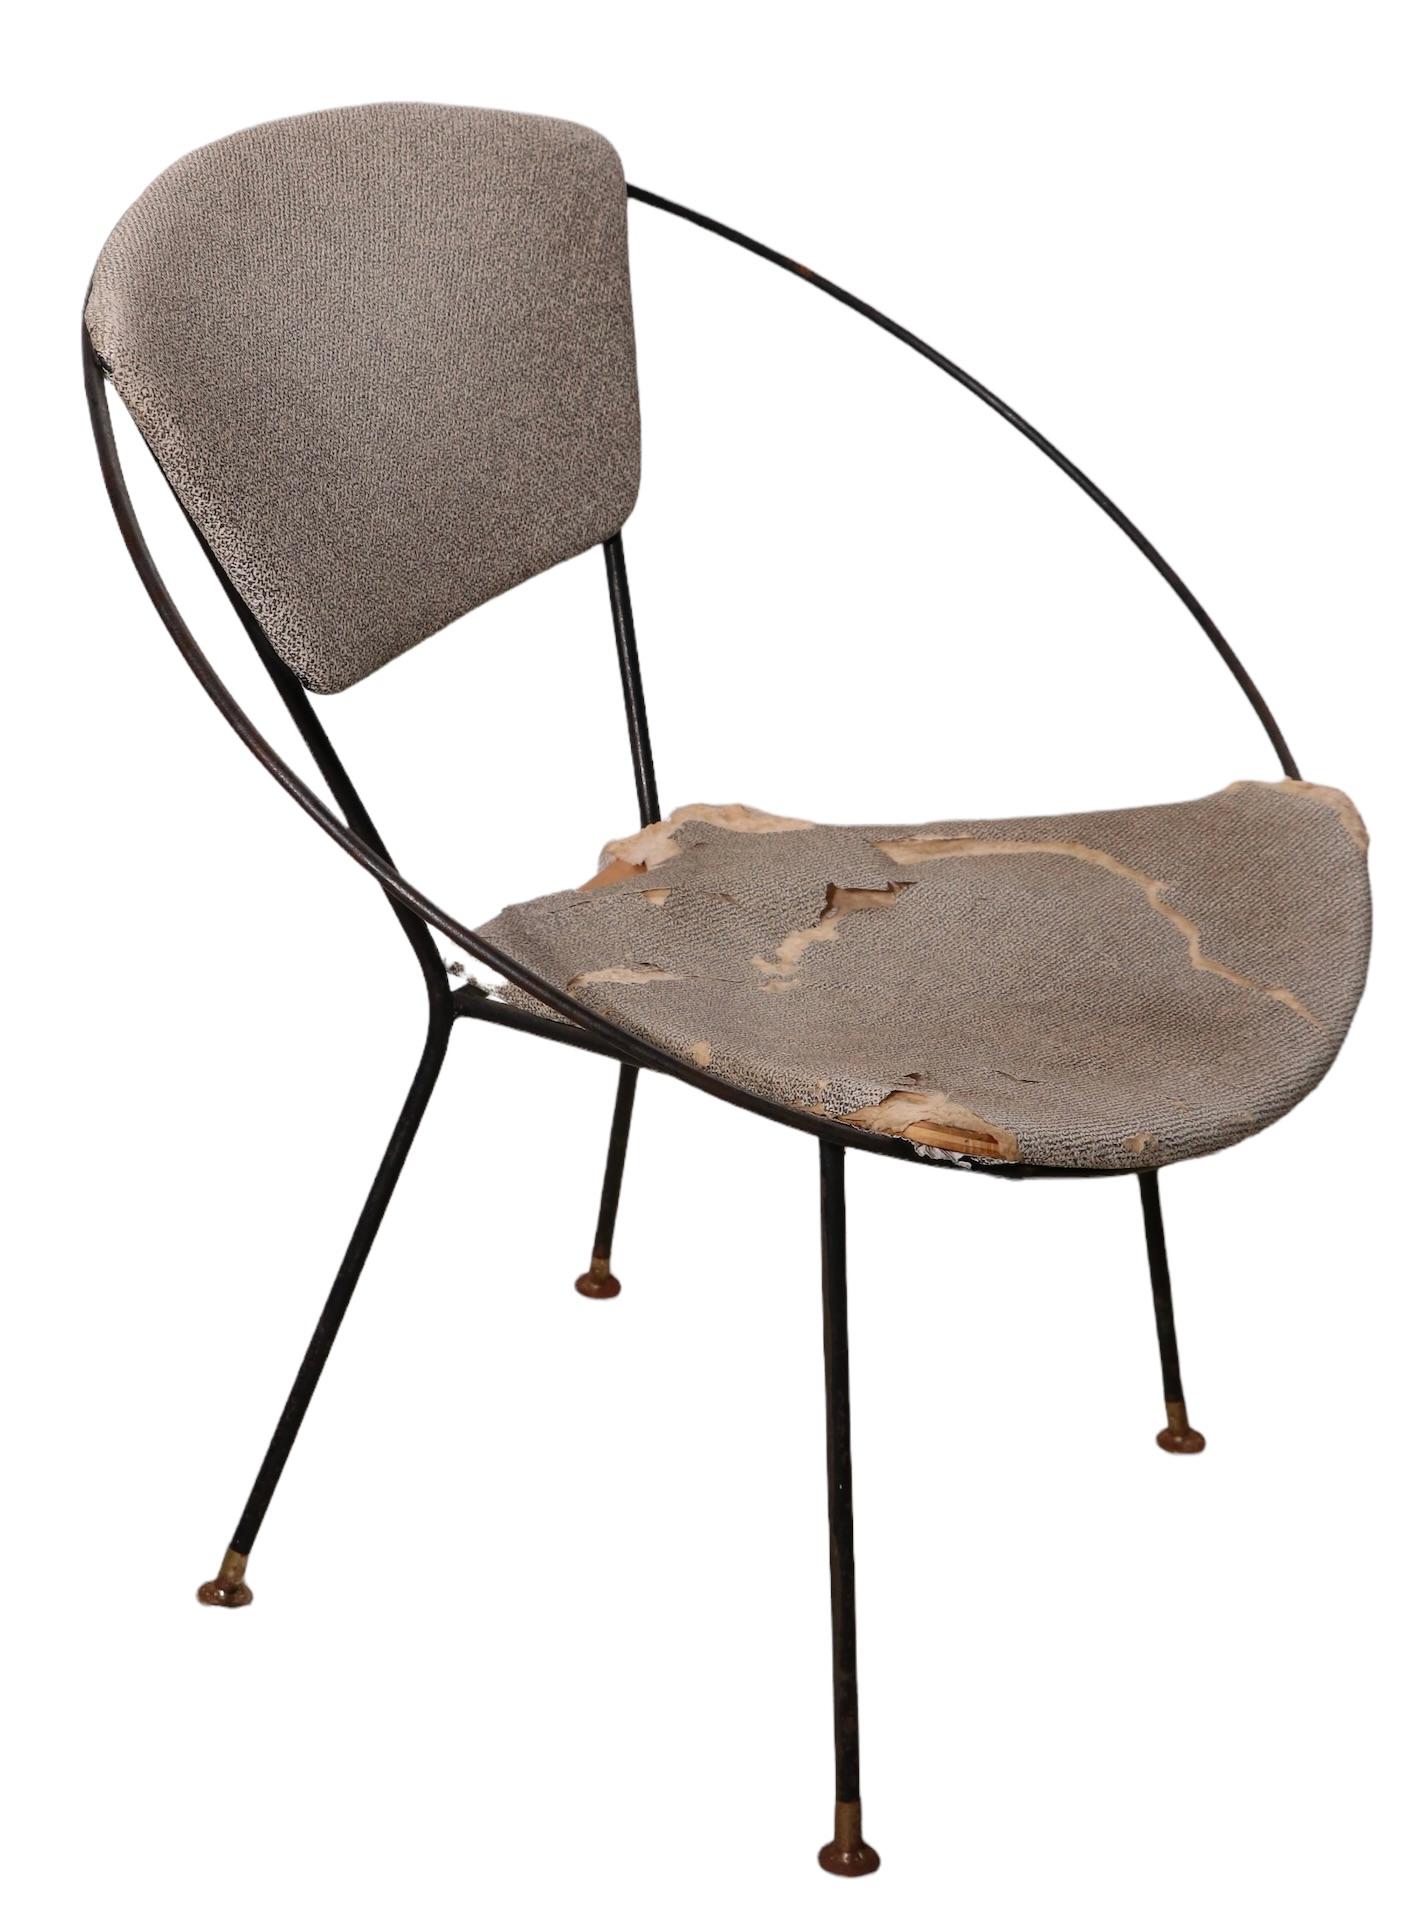 Pr. Wrought Iron Mid Century Hoop Chairs by John Cicchelli for Riley Wolff 1950s For Sale 6